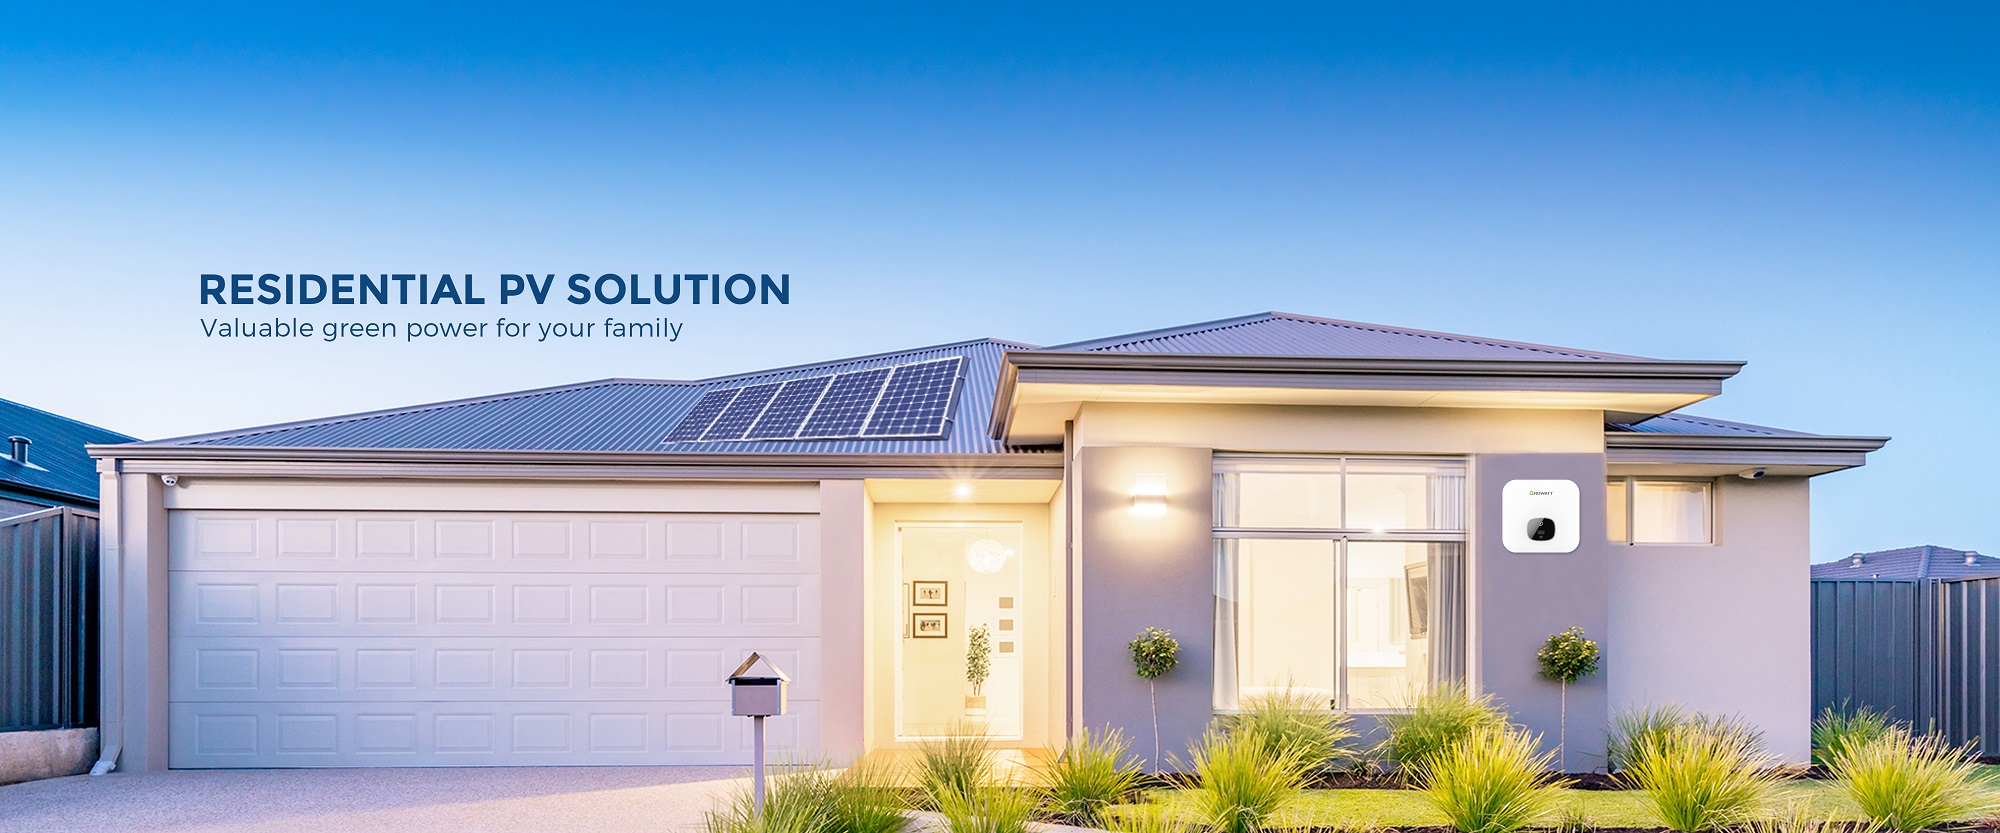 RESIDENTIAL PV SOLUTION